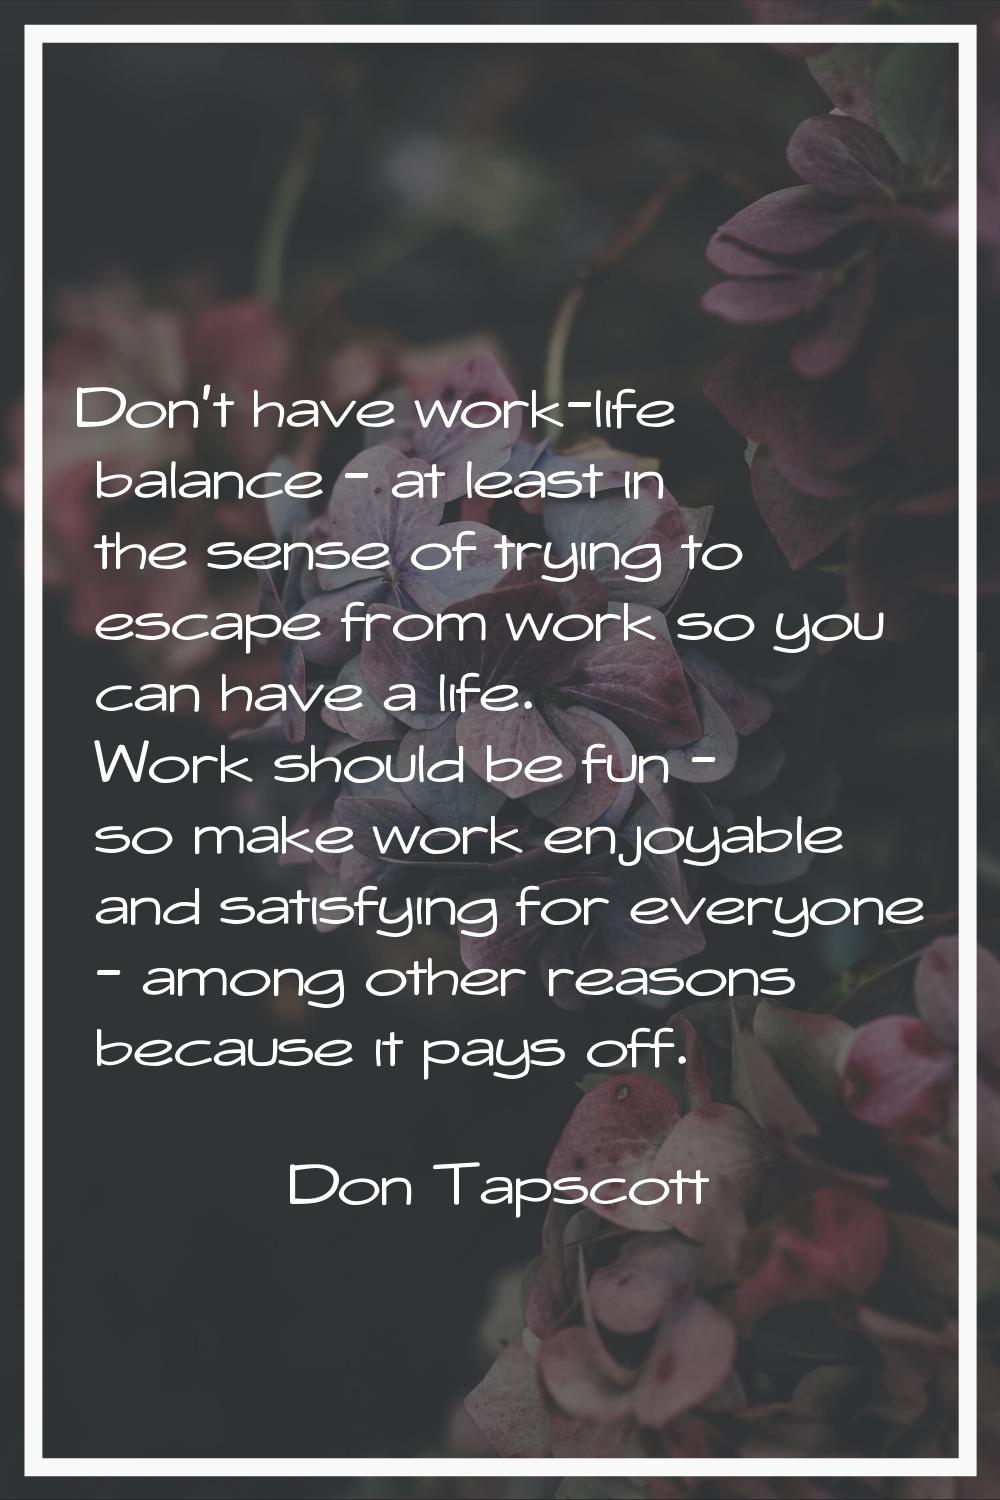 Don't have work-life balance - at least in the sense of trying to escape from work so you can have 